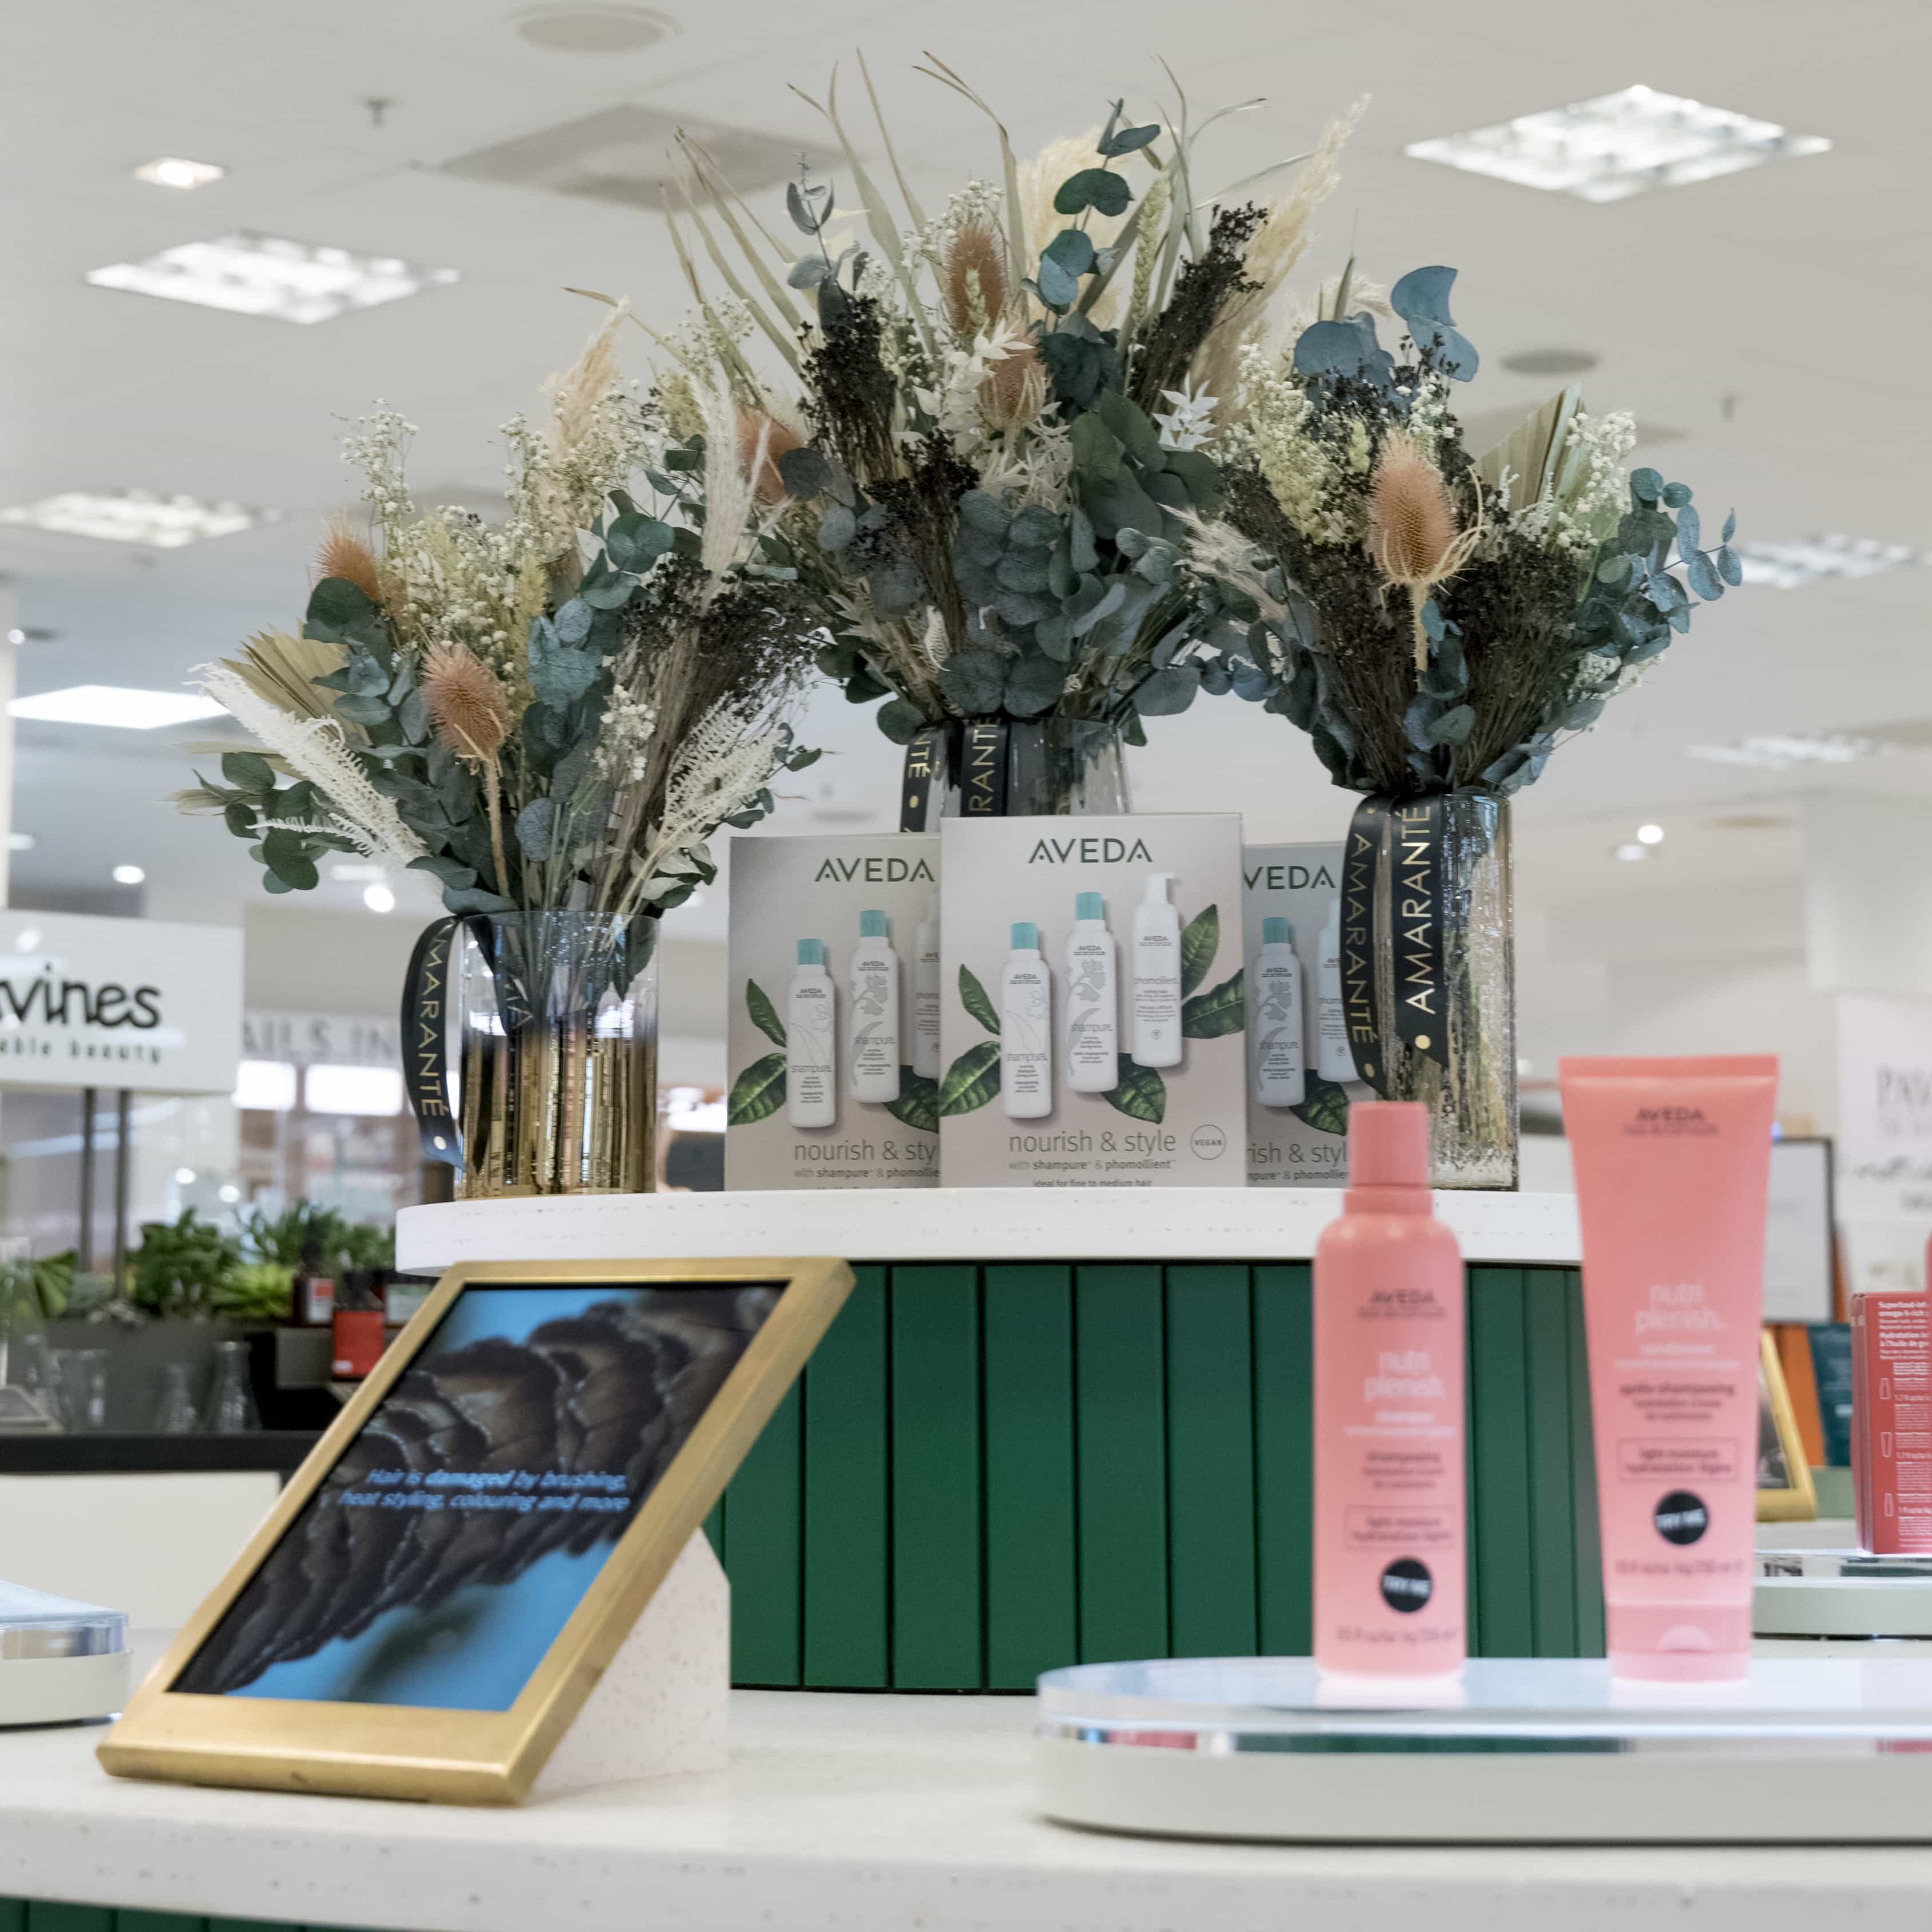 For their stand in Selfridge’s London store, Aveda partnered with event florist Amaranté London to install a series of sustainable arrangements.